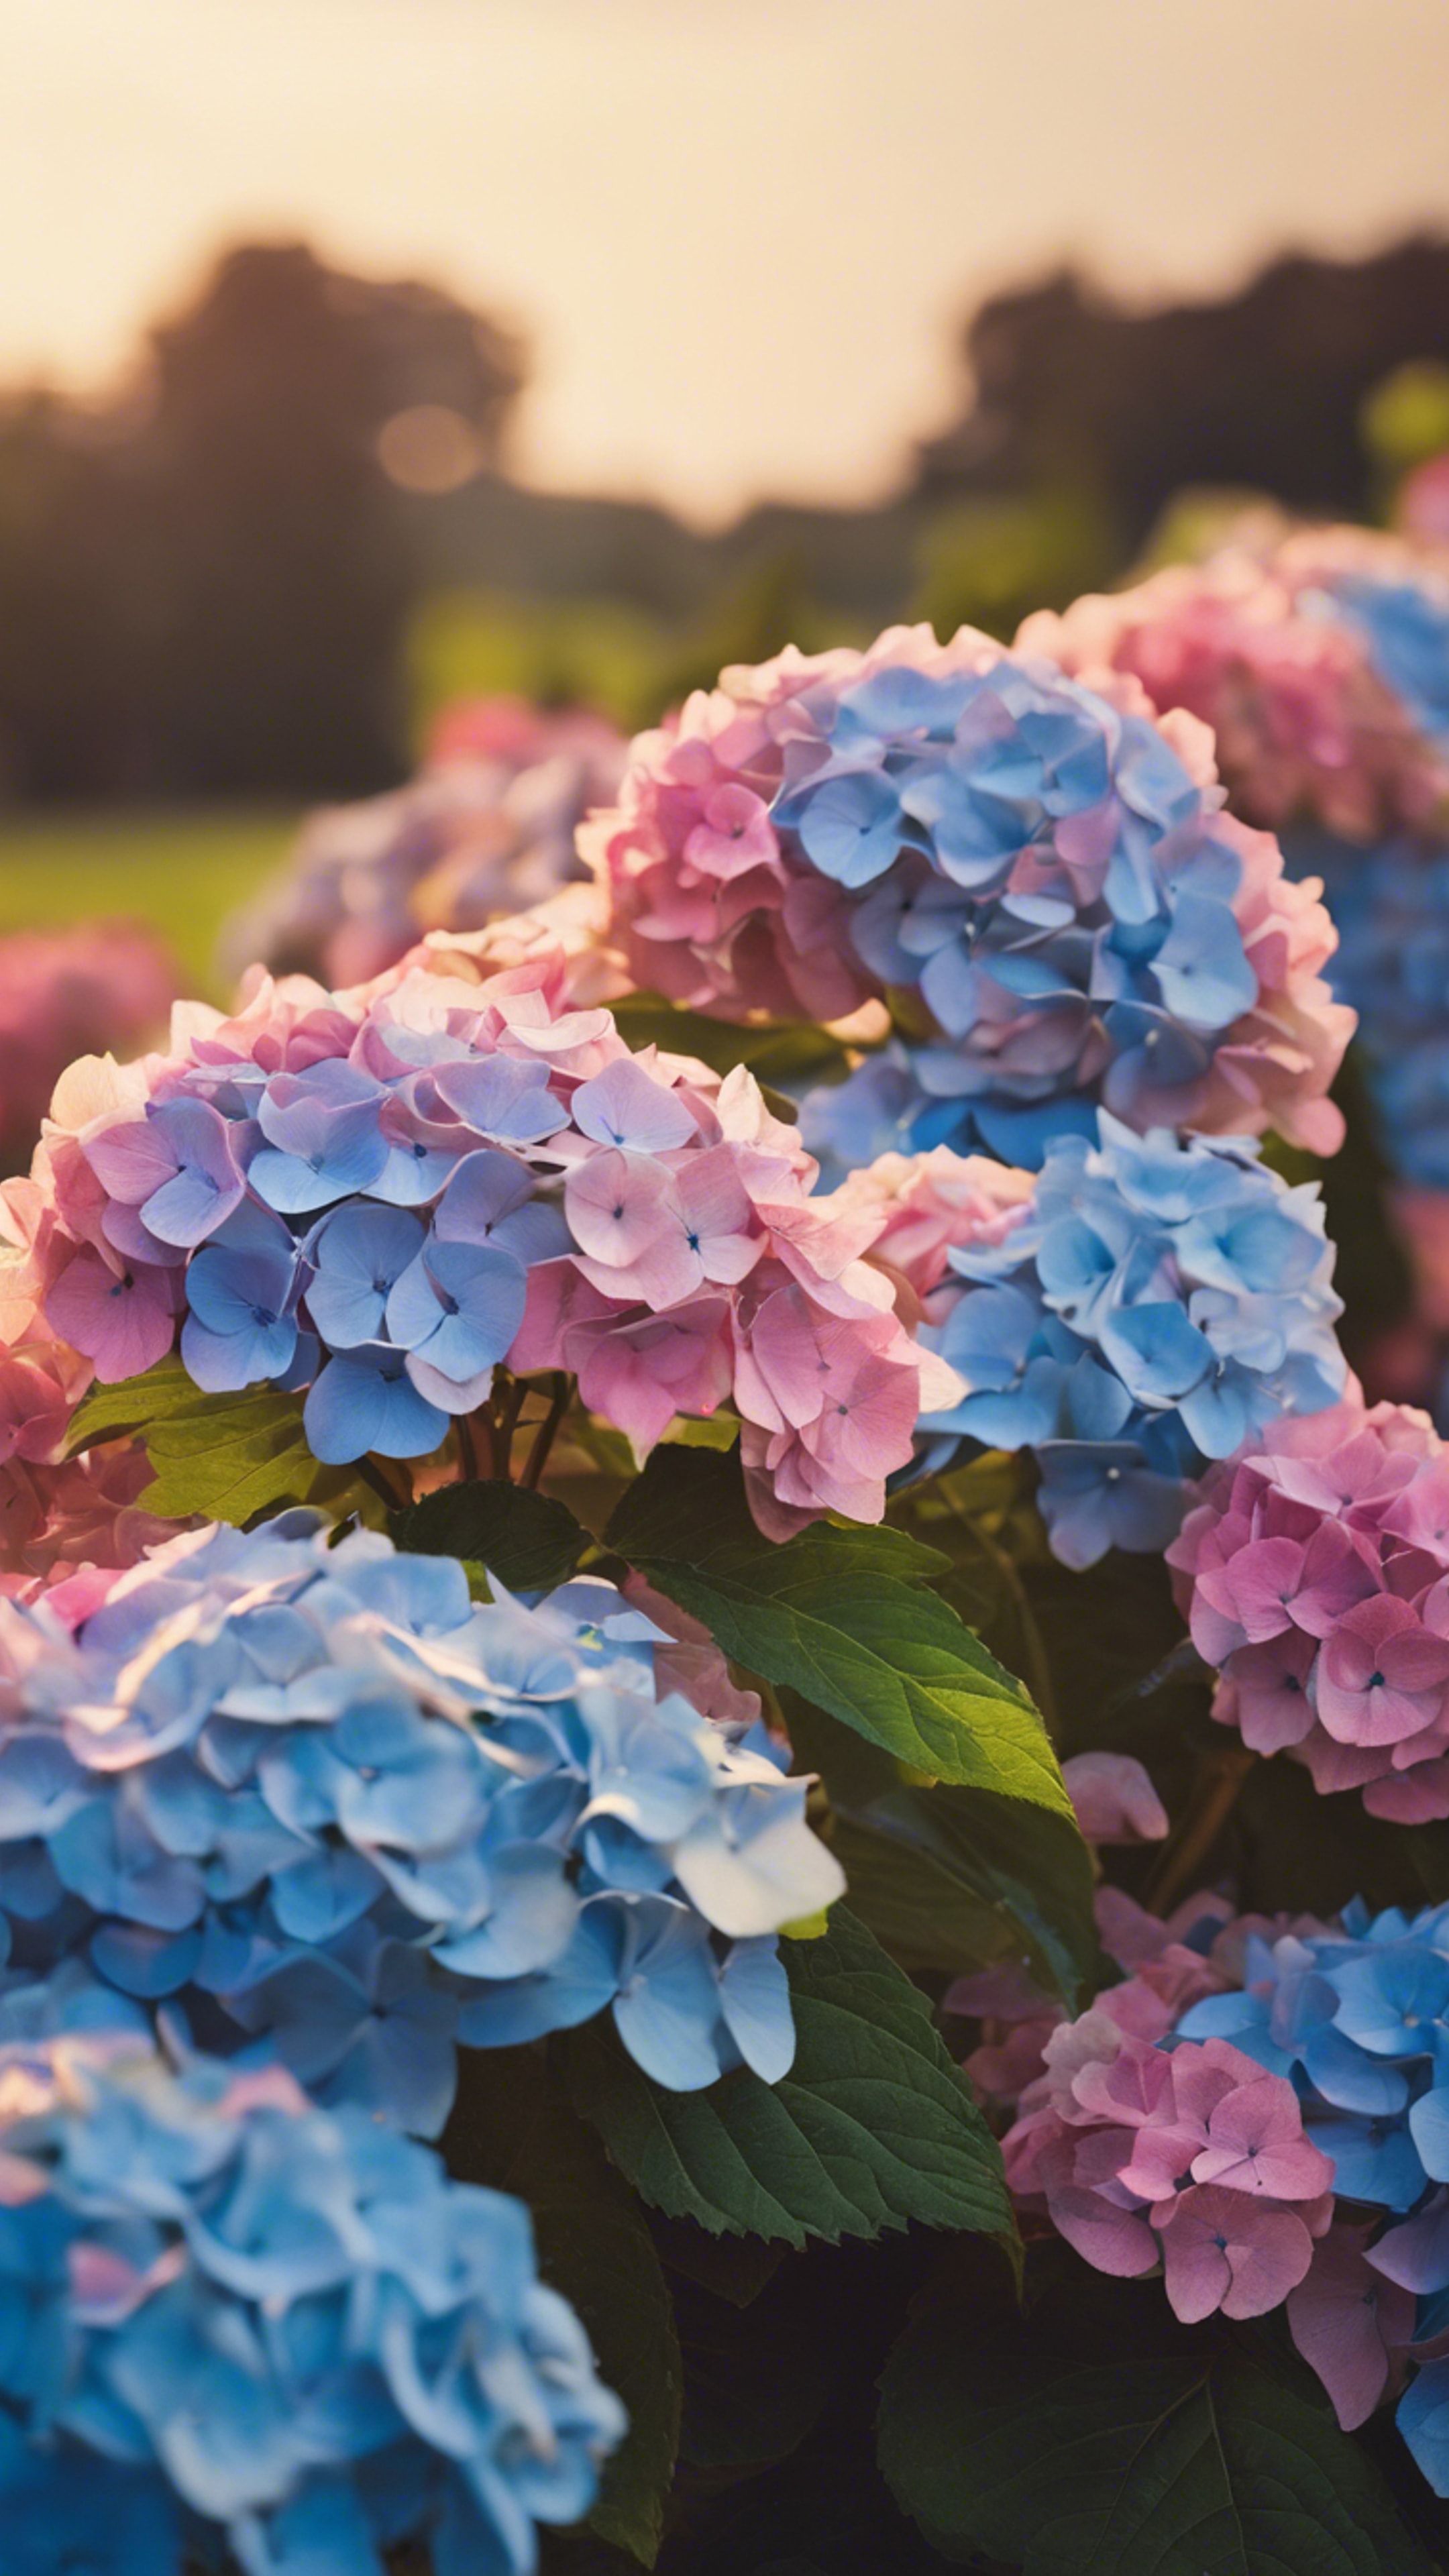 A colourful display of blue and pink hydrangea flowers in full bloom under the golden evening sunlight.壁紙[7c4381859b6a4ecb9d63]